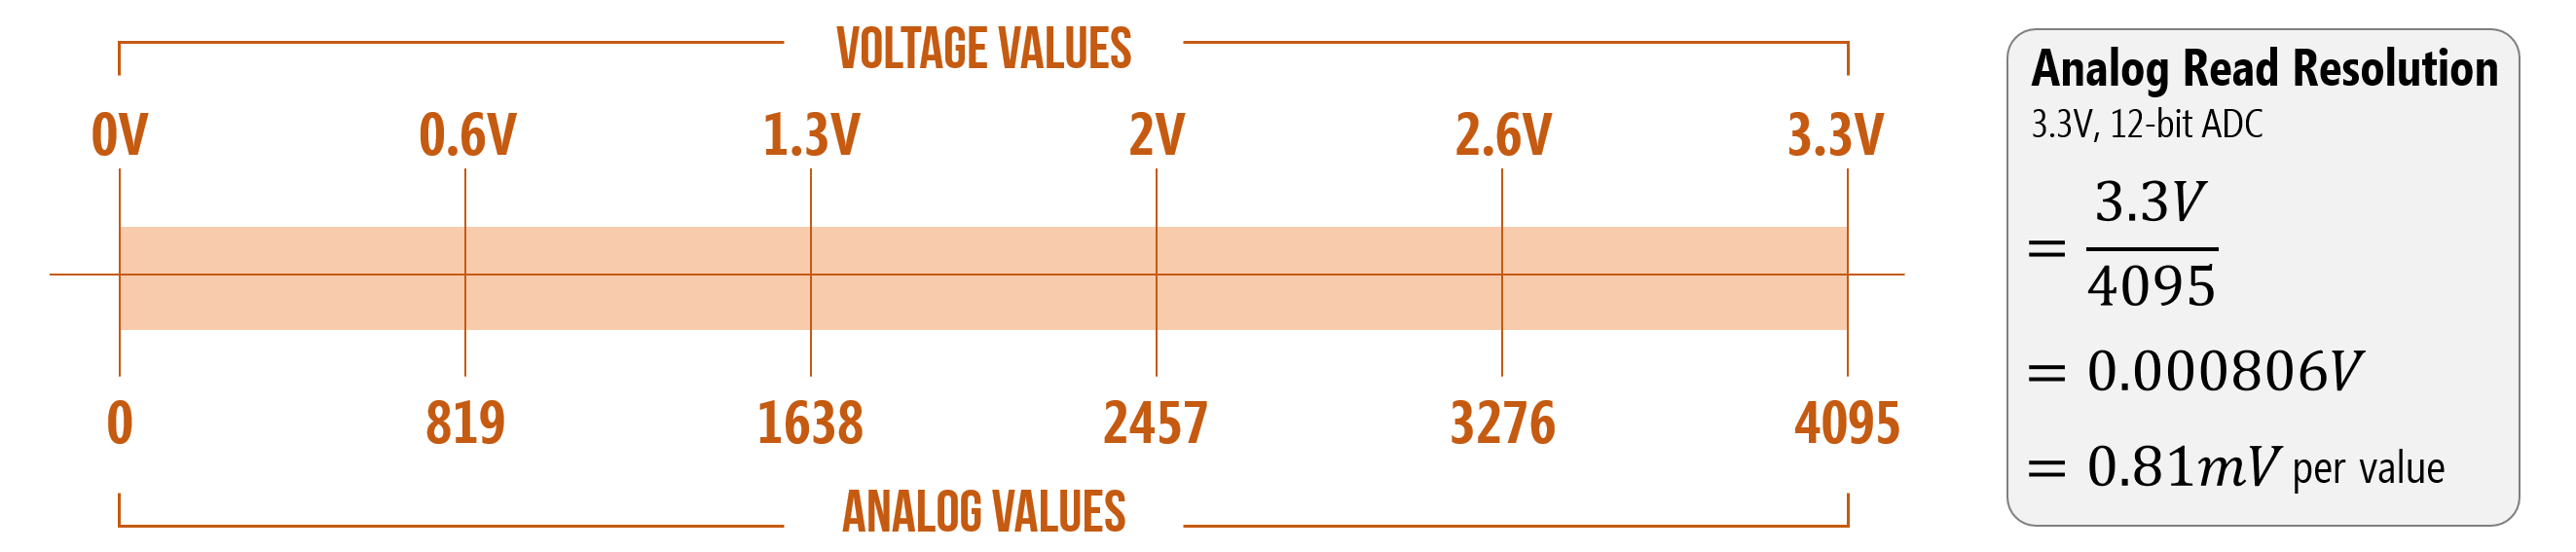 A graph showing the mapping between voltage values and analog values with 12-bit ADC and 3.3V board